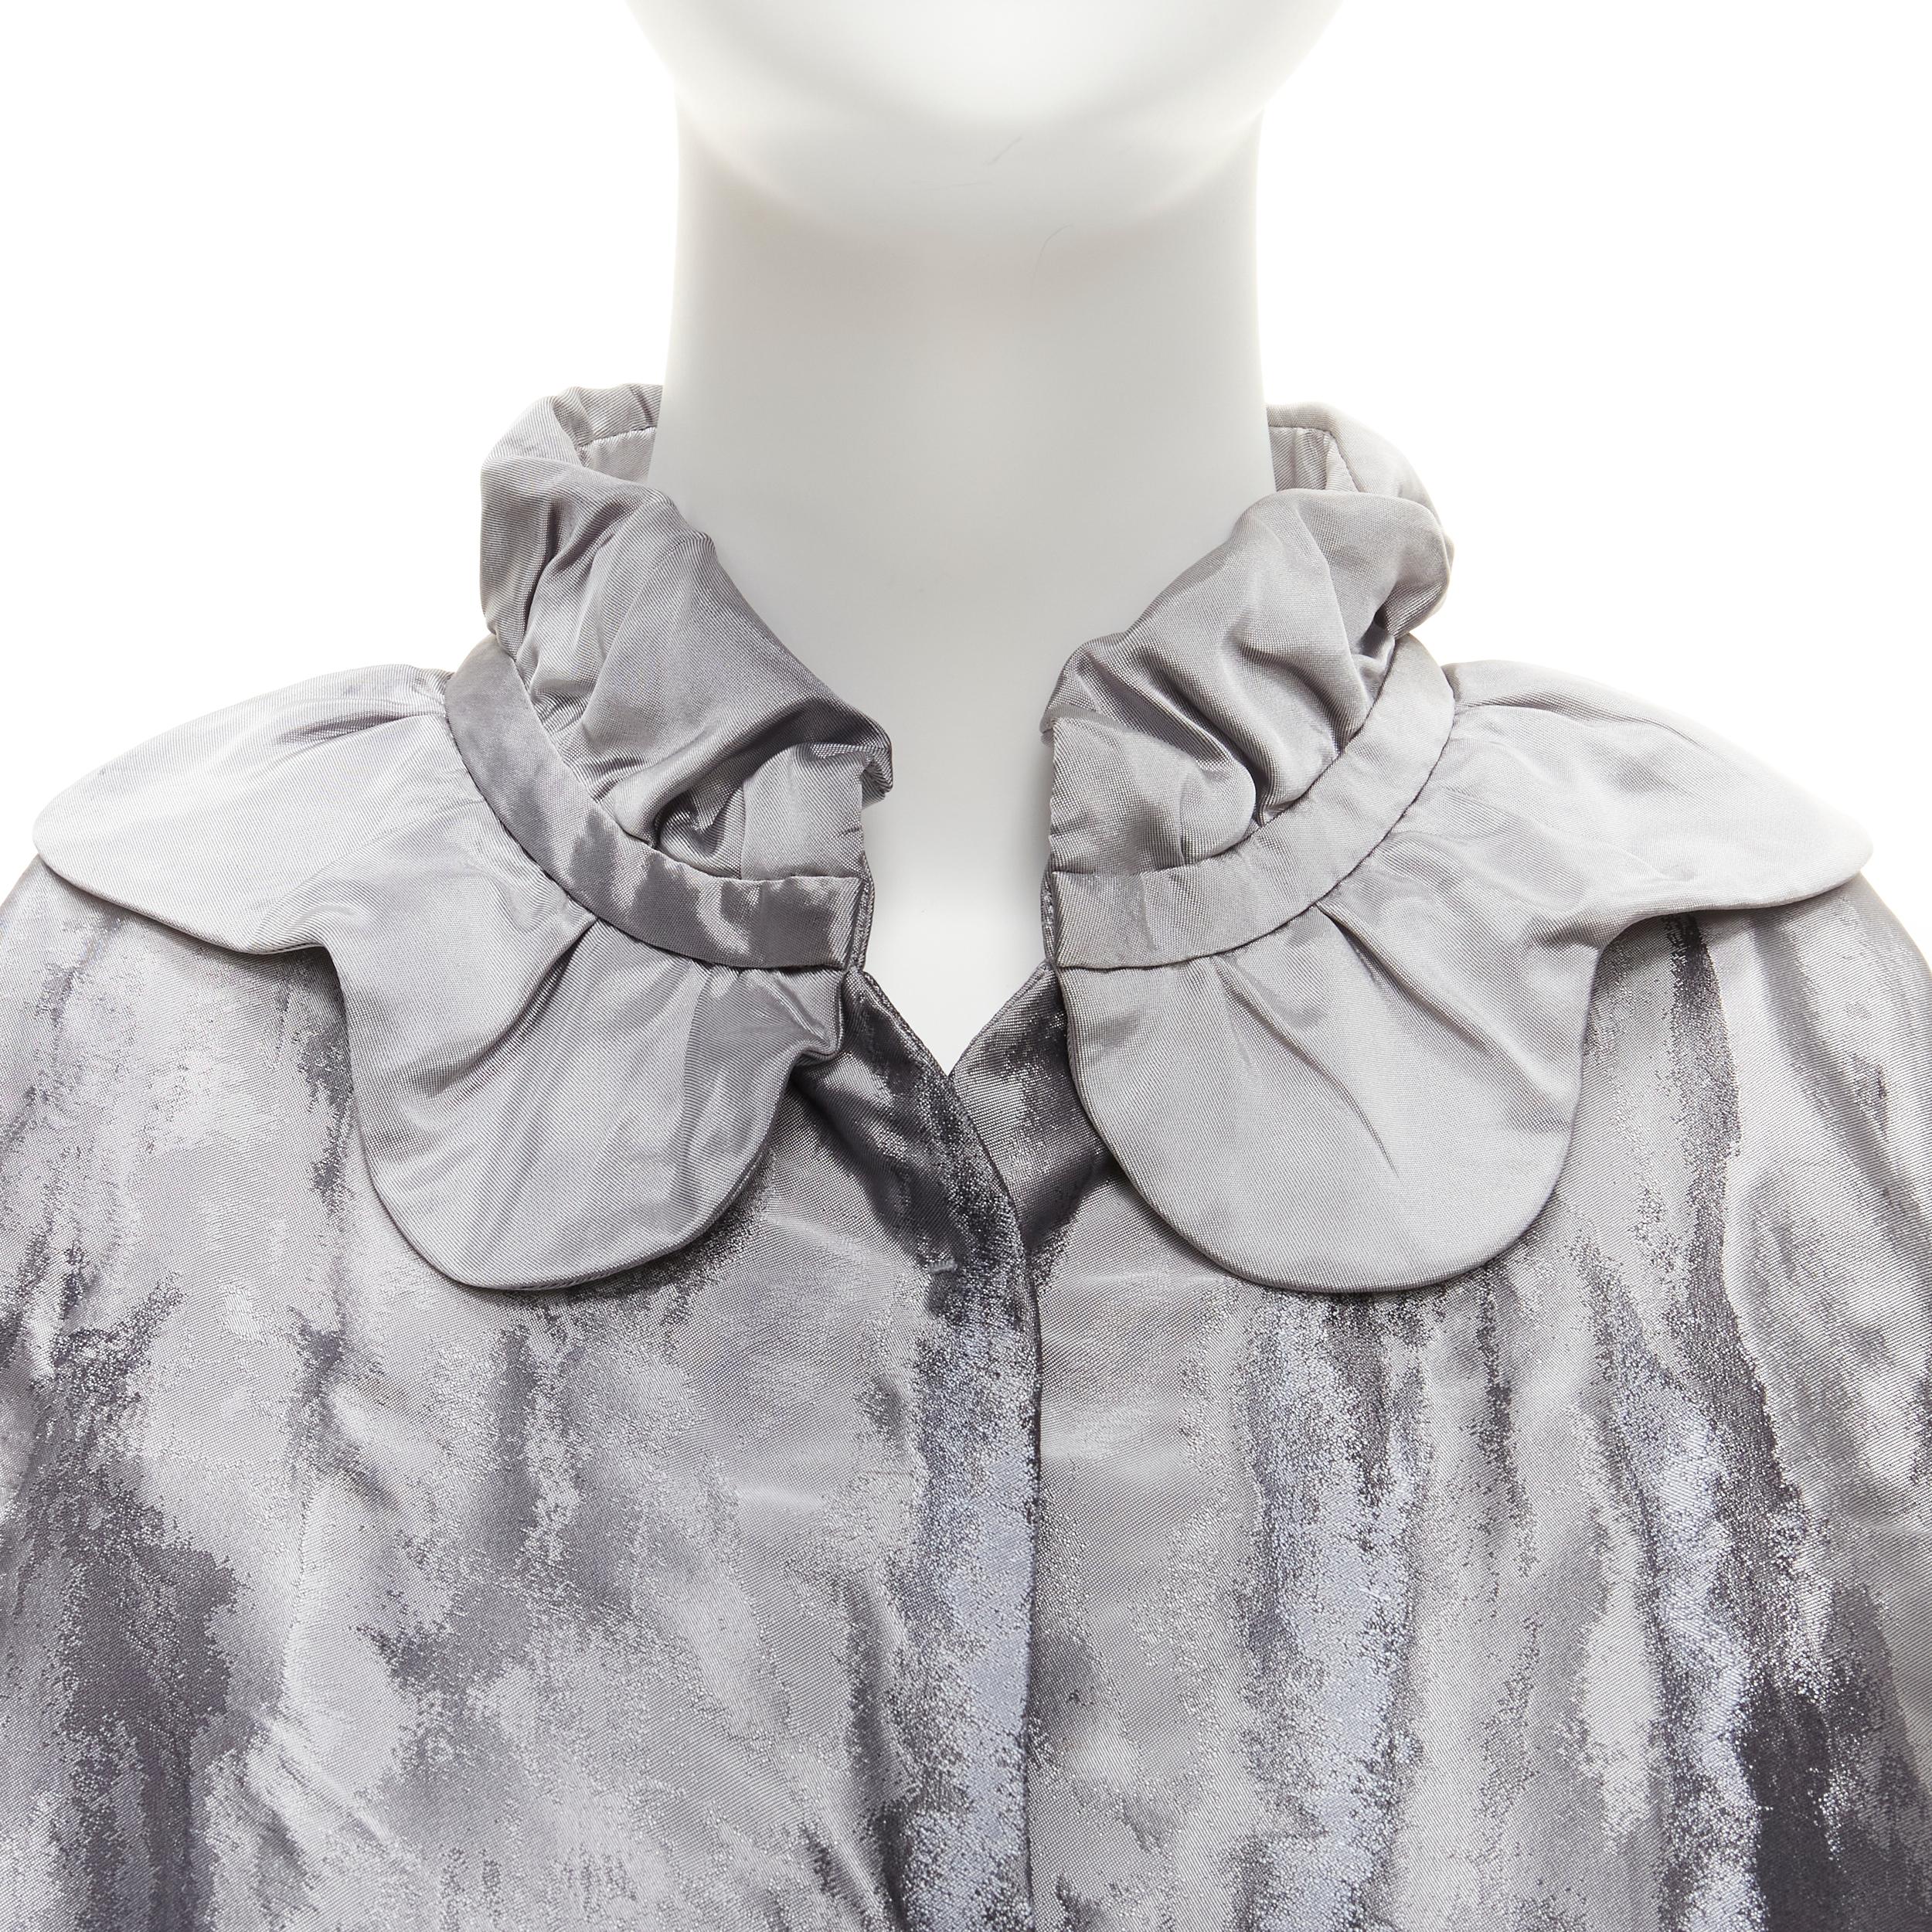 SHIATZY CHEN grey abstract watercolour floral silk brocade scallop collar vest IT44 L
Reference: TGAS/D00072
Brand: Shiatzy Chen
Material: Acetate, Silk
Color: Grey
Pattern: Abstract
Closure: Snap Buttons
Lining: Grey Silk
Extra Details: Scallop